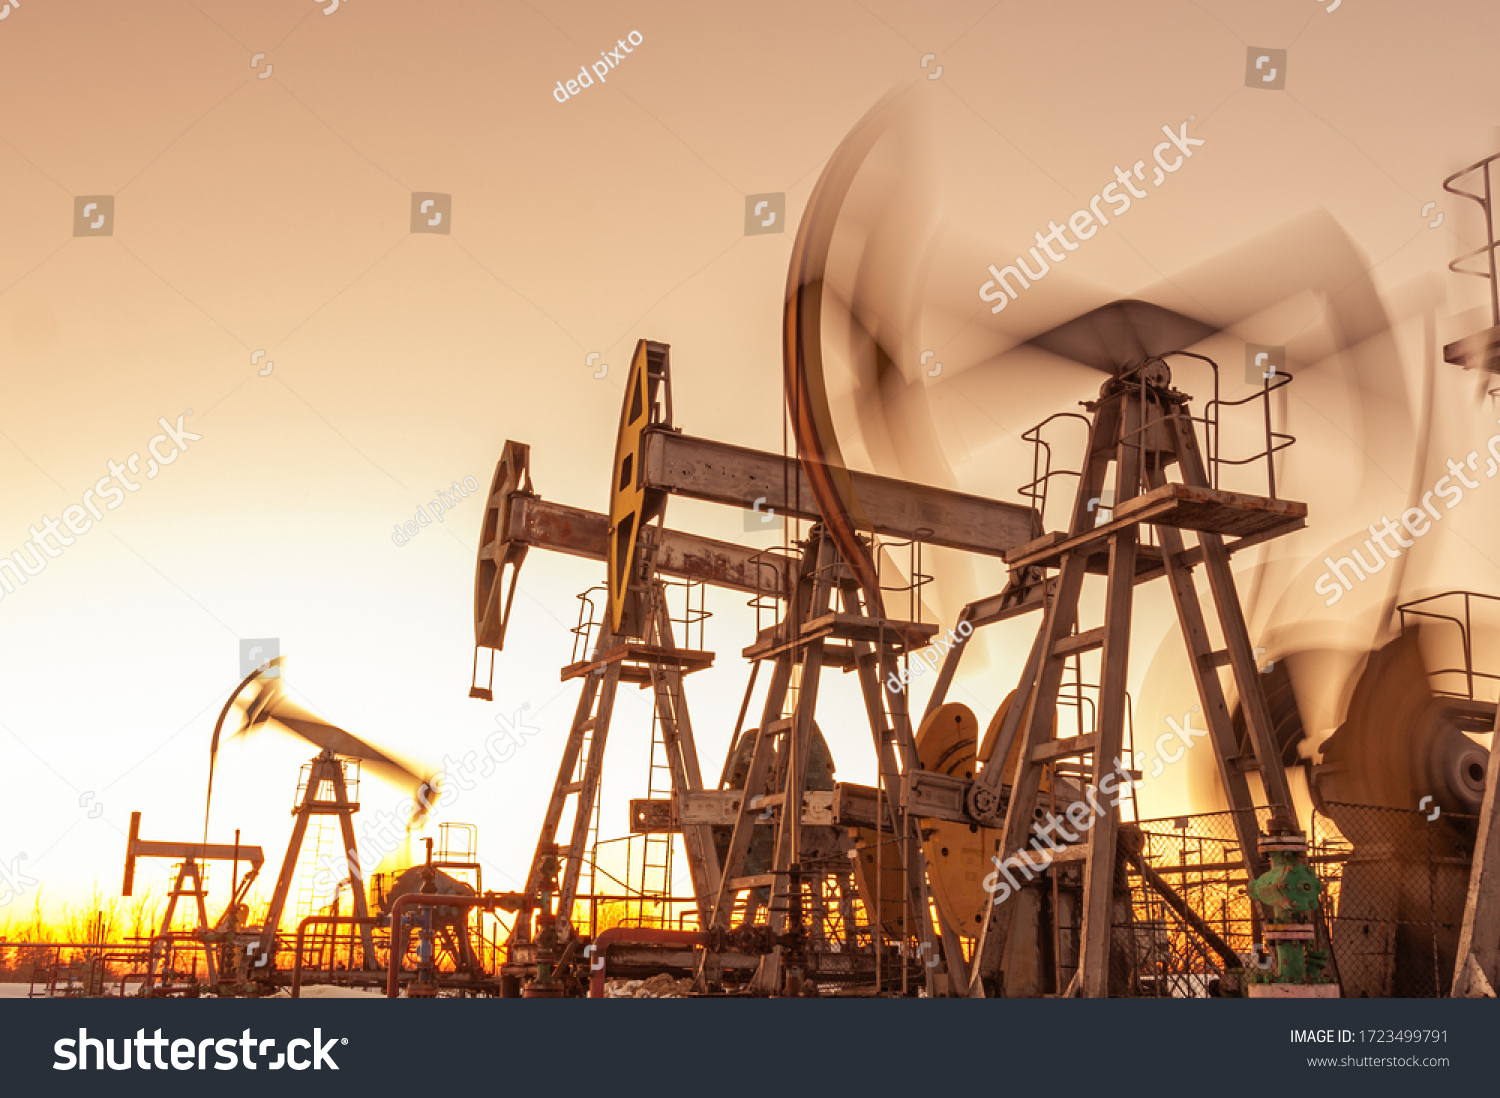 Oil pump rig. Oil and gas production. Oilfield site. Pump Jack are running. Drilling derricks for fossil fuels output and crude oil production. War on oil prices. Global coronavirus COVID 19 crisis. #1723499791